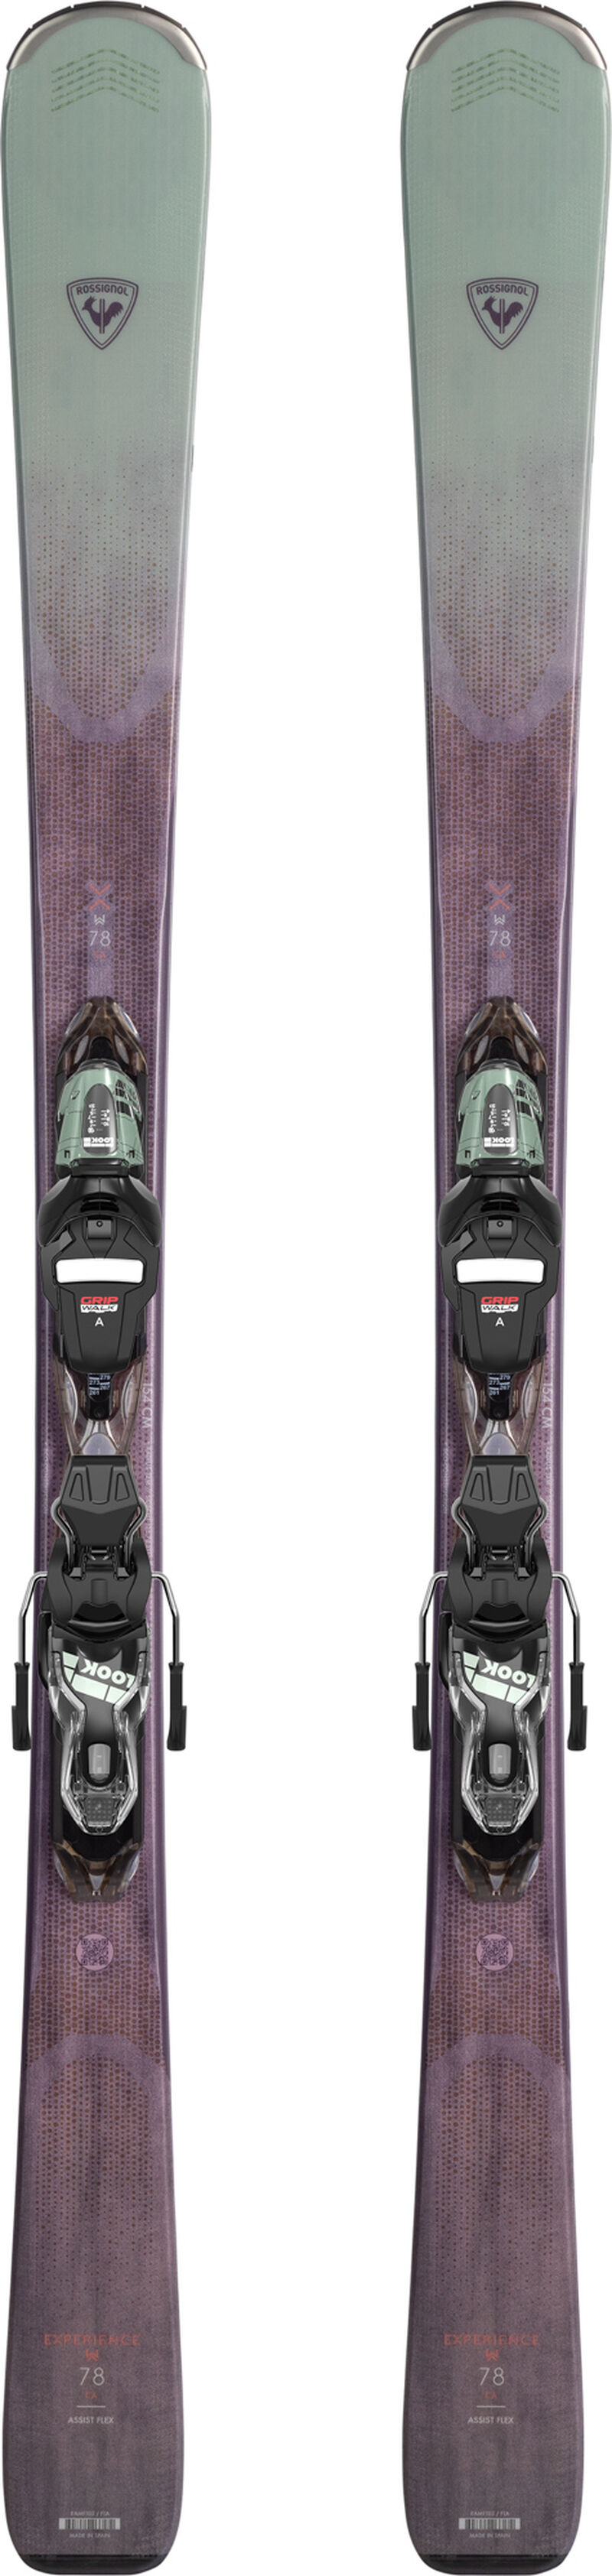 Rossignol Skis All Mountain femme EXPERIENCE W 78 CARBON (XPRESS) 